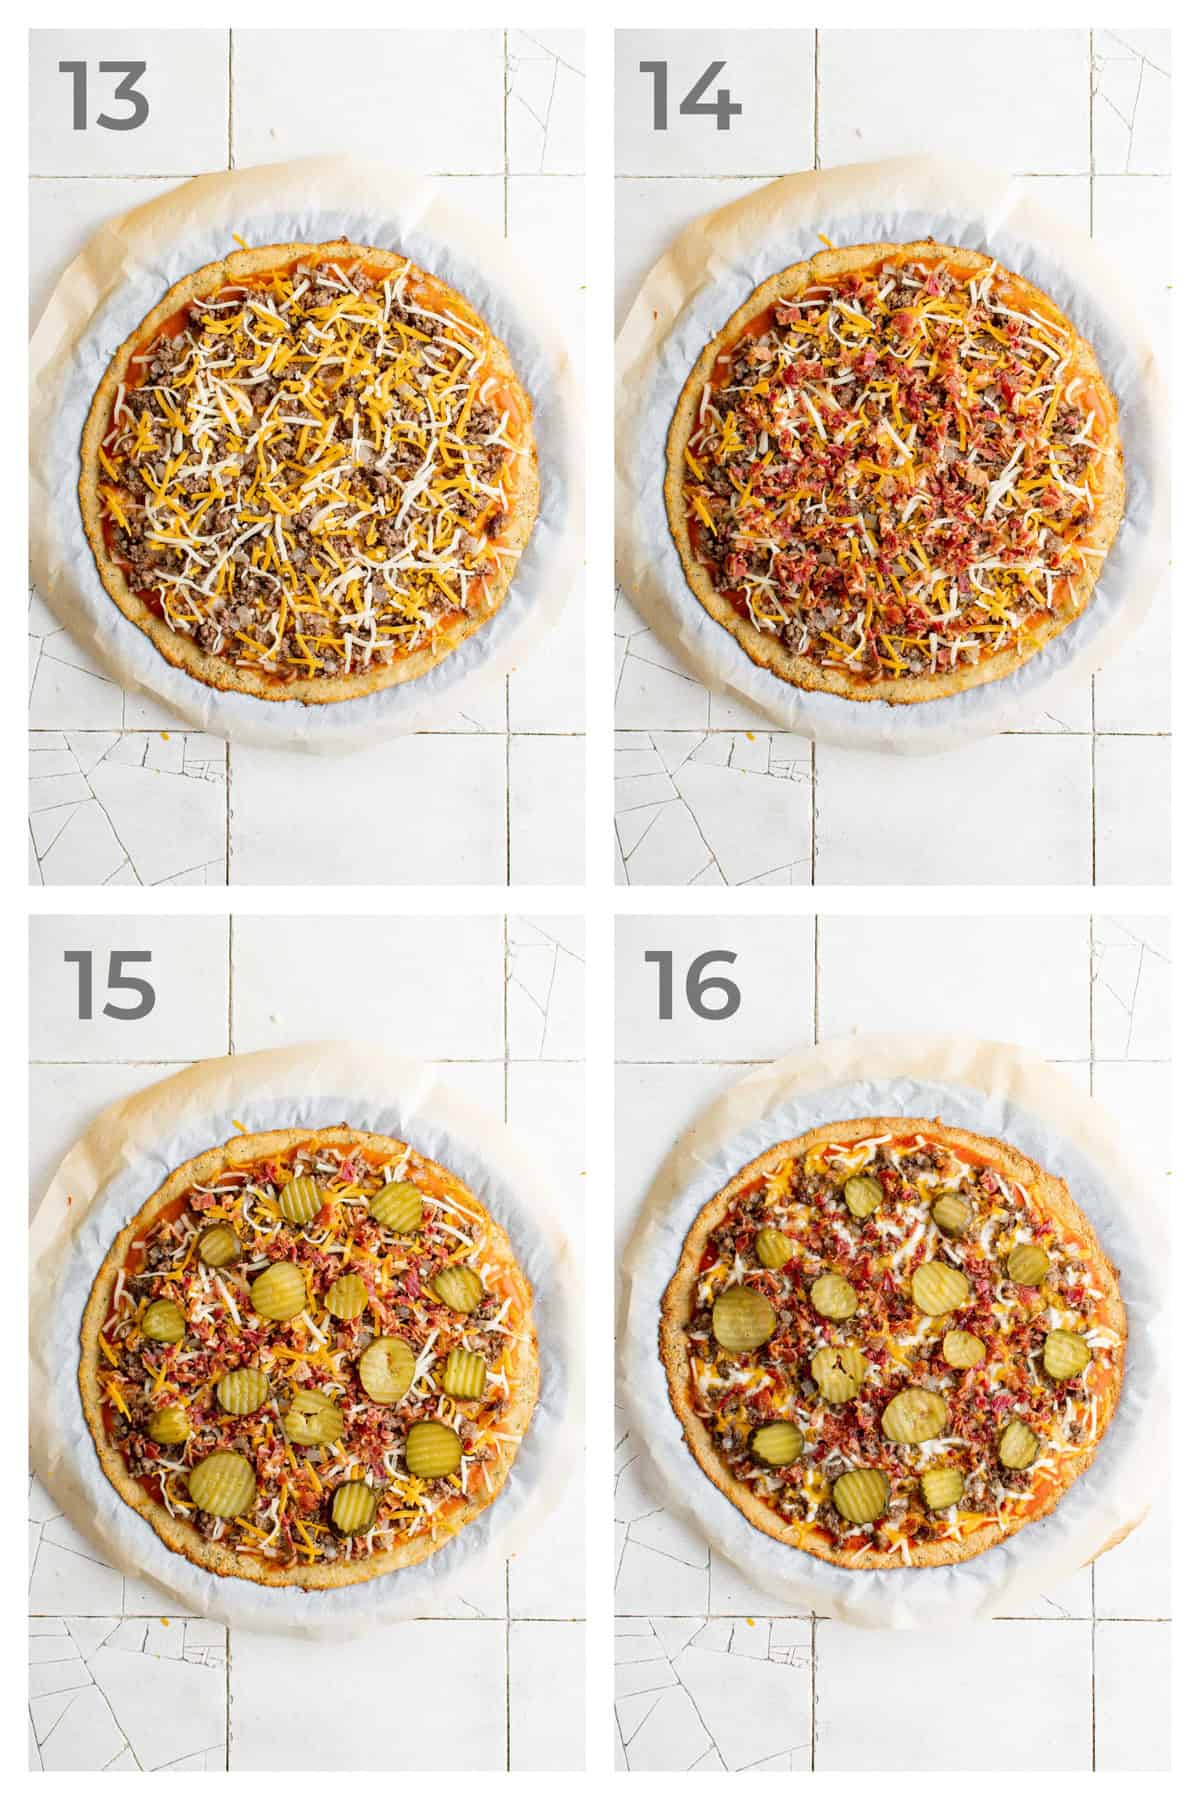 step by step directions for making a low carb cheeseburger pizza